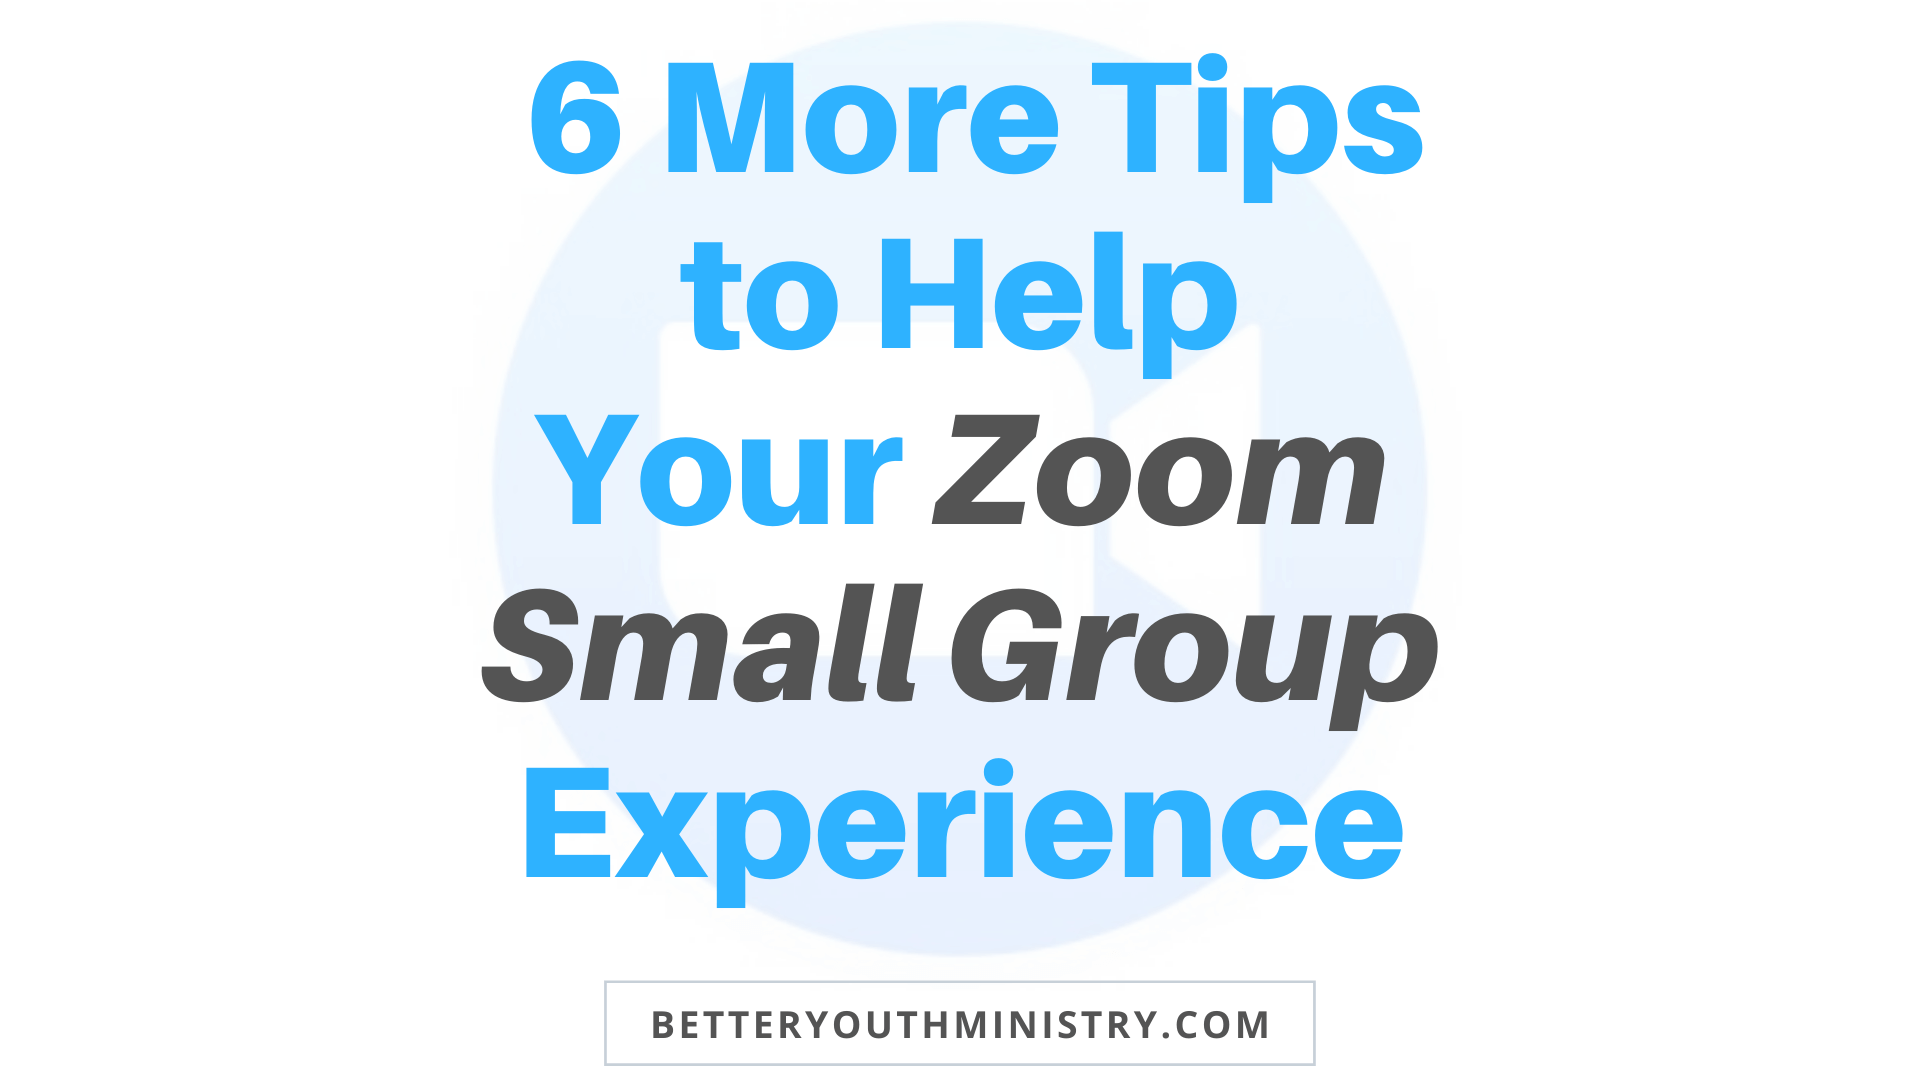 6 more tips to help your zoom small group experience